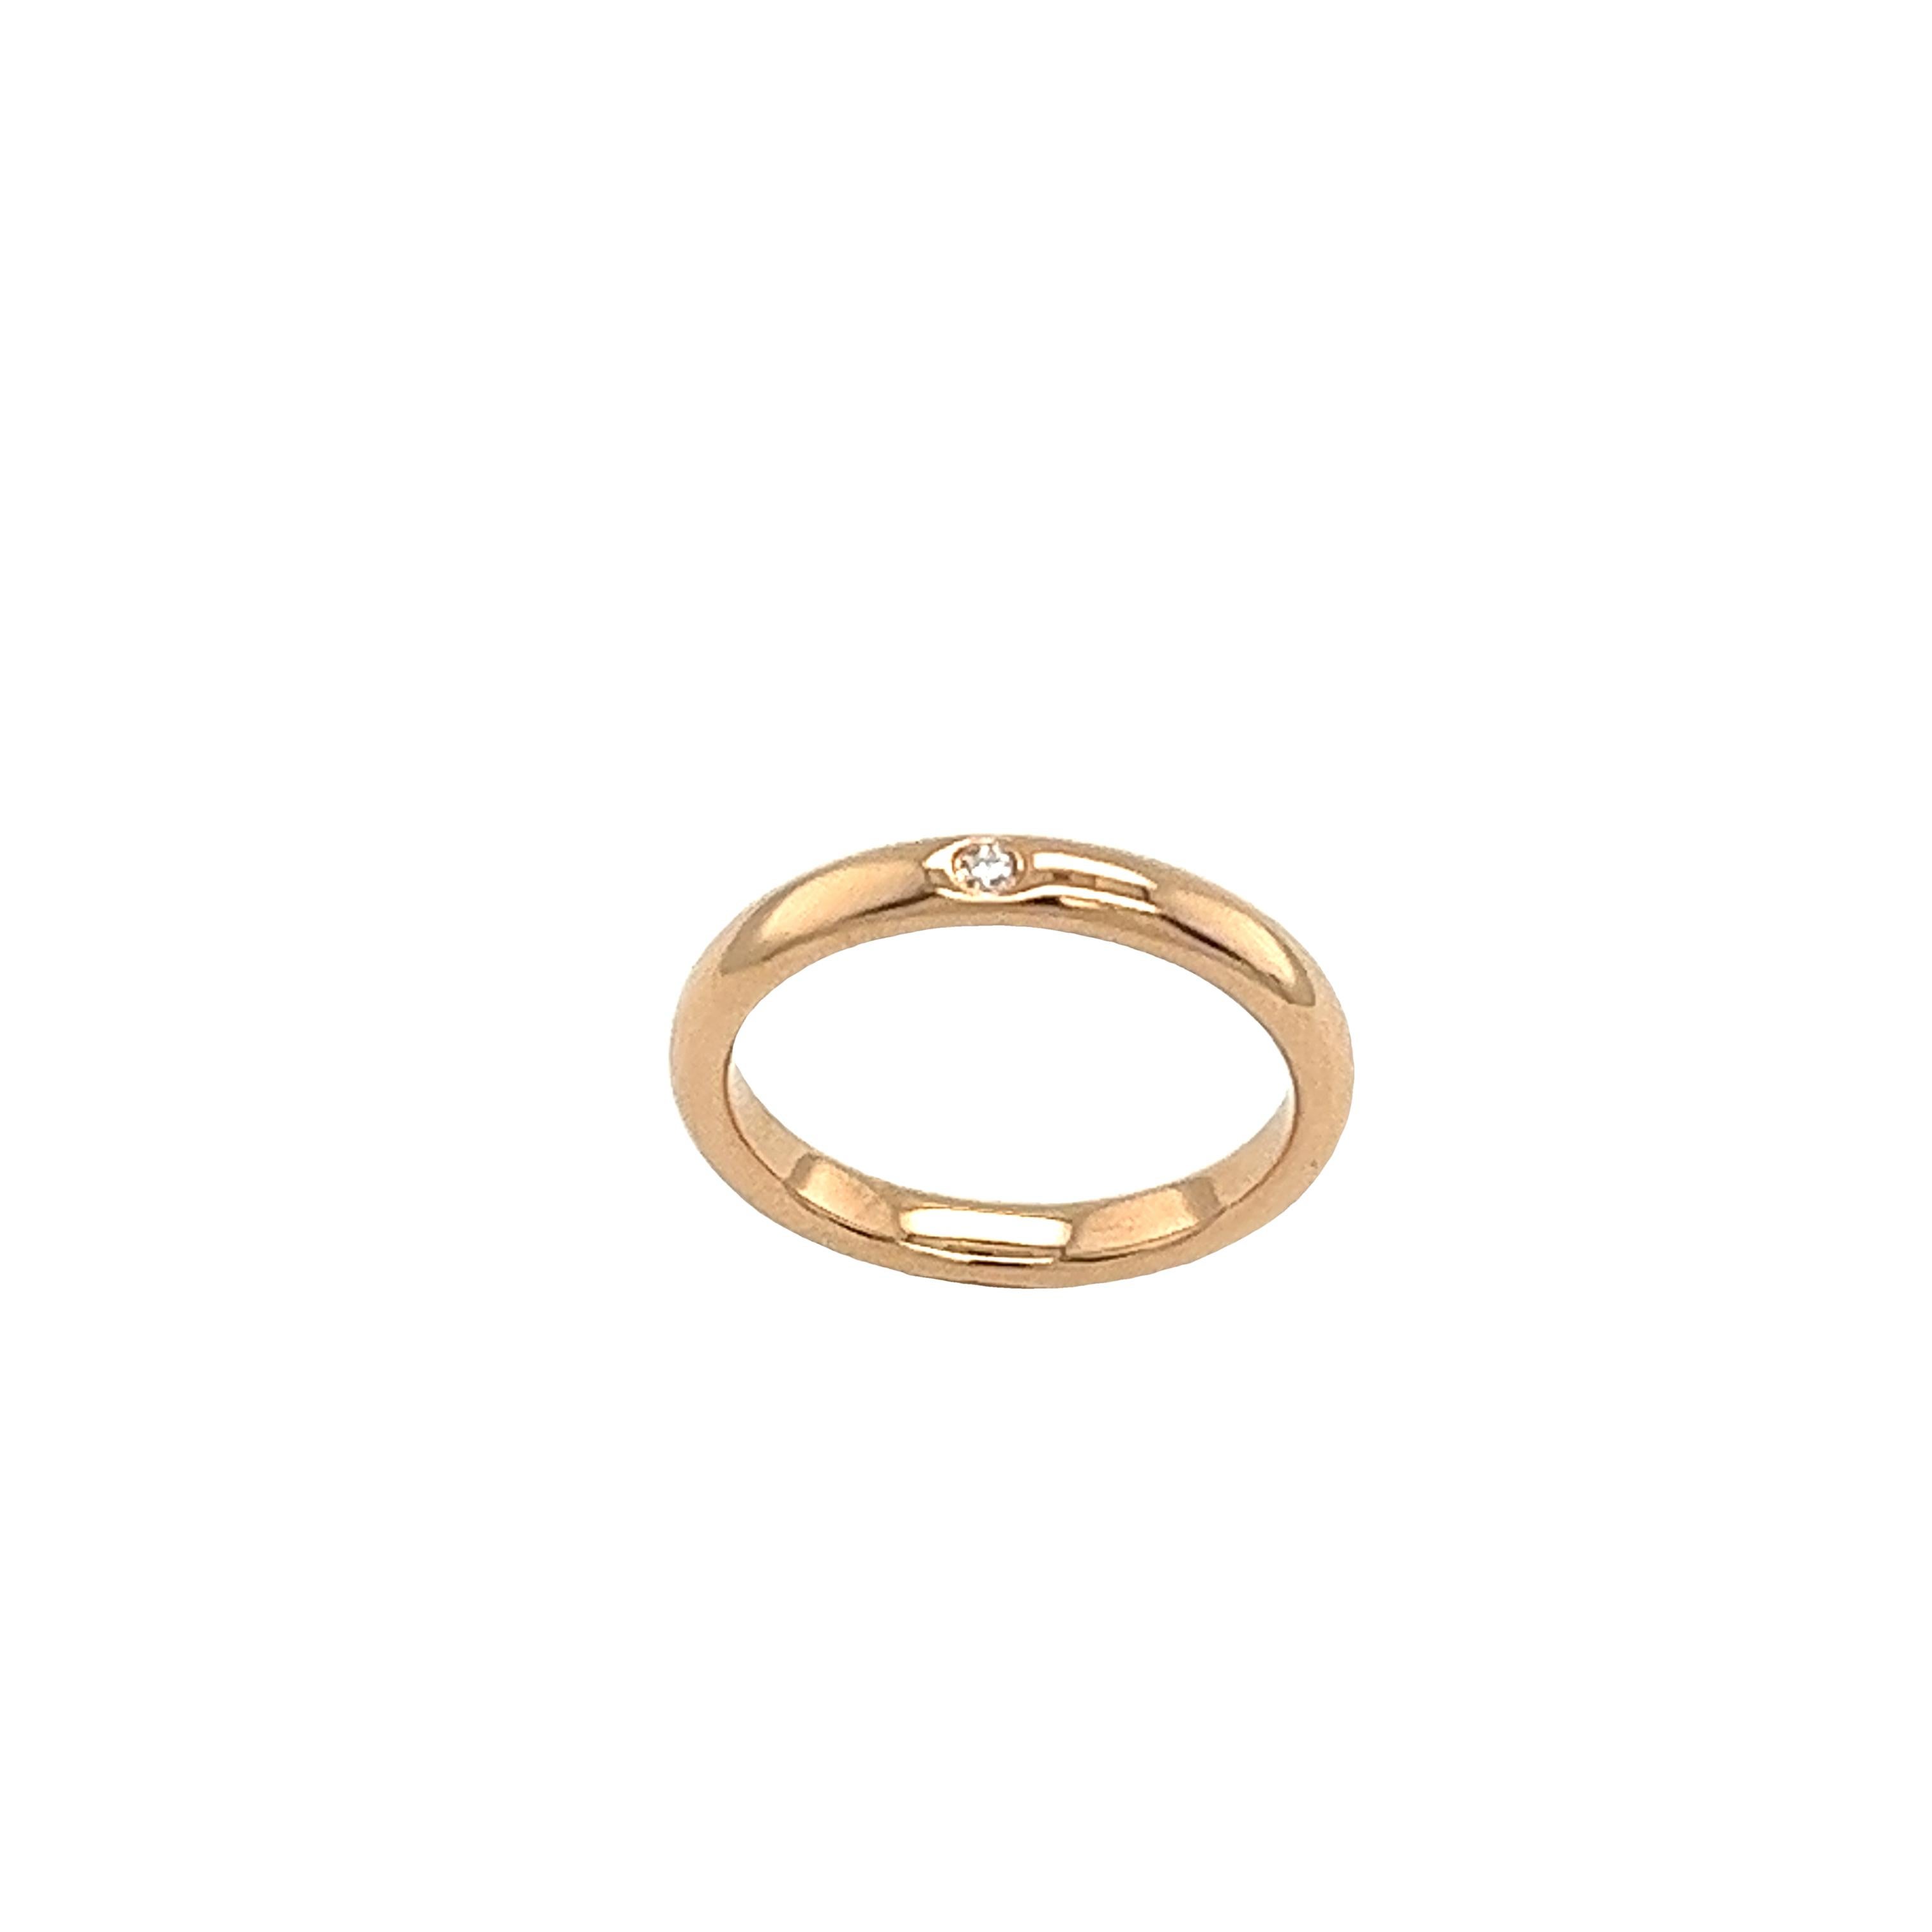 Tiffany & Co. Elsa Peretti 18ct Rose Gold Single Diamond Ring In Excellent Condition For Sale In London, GB